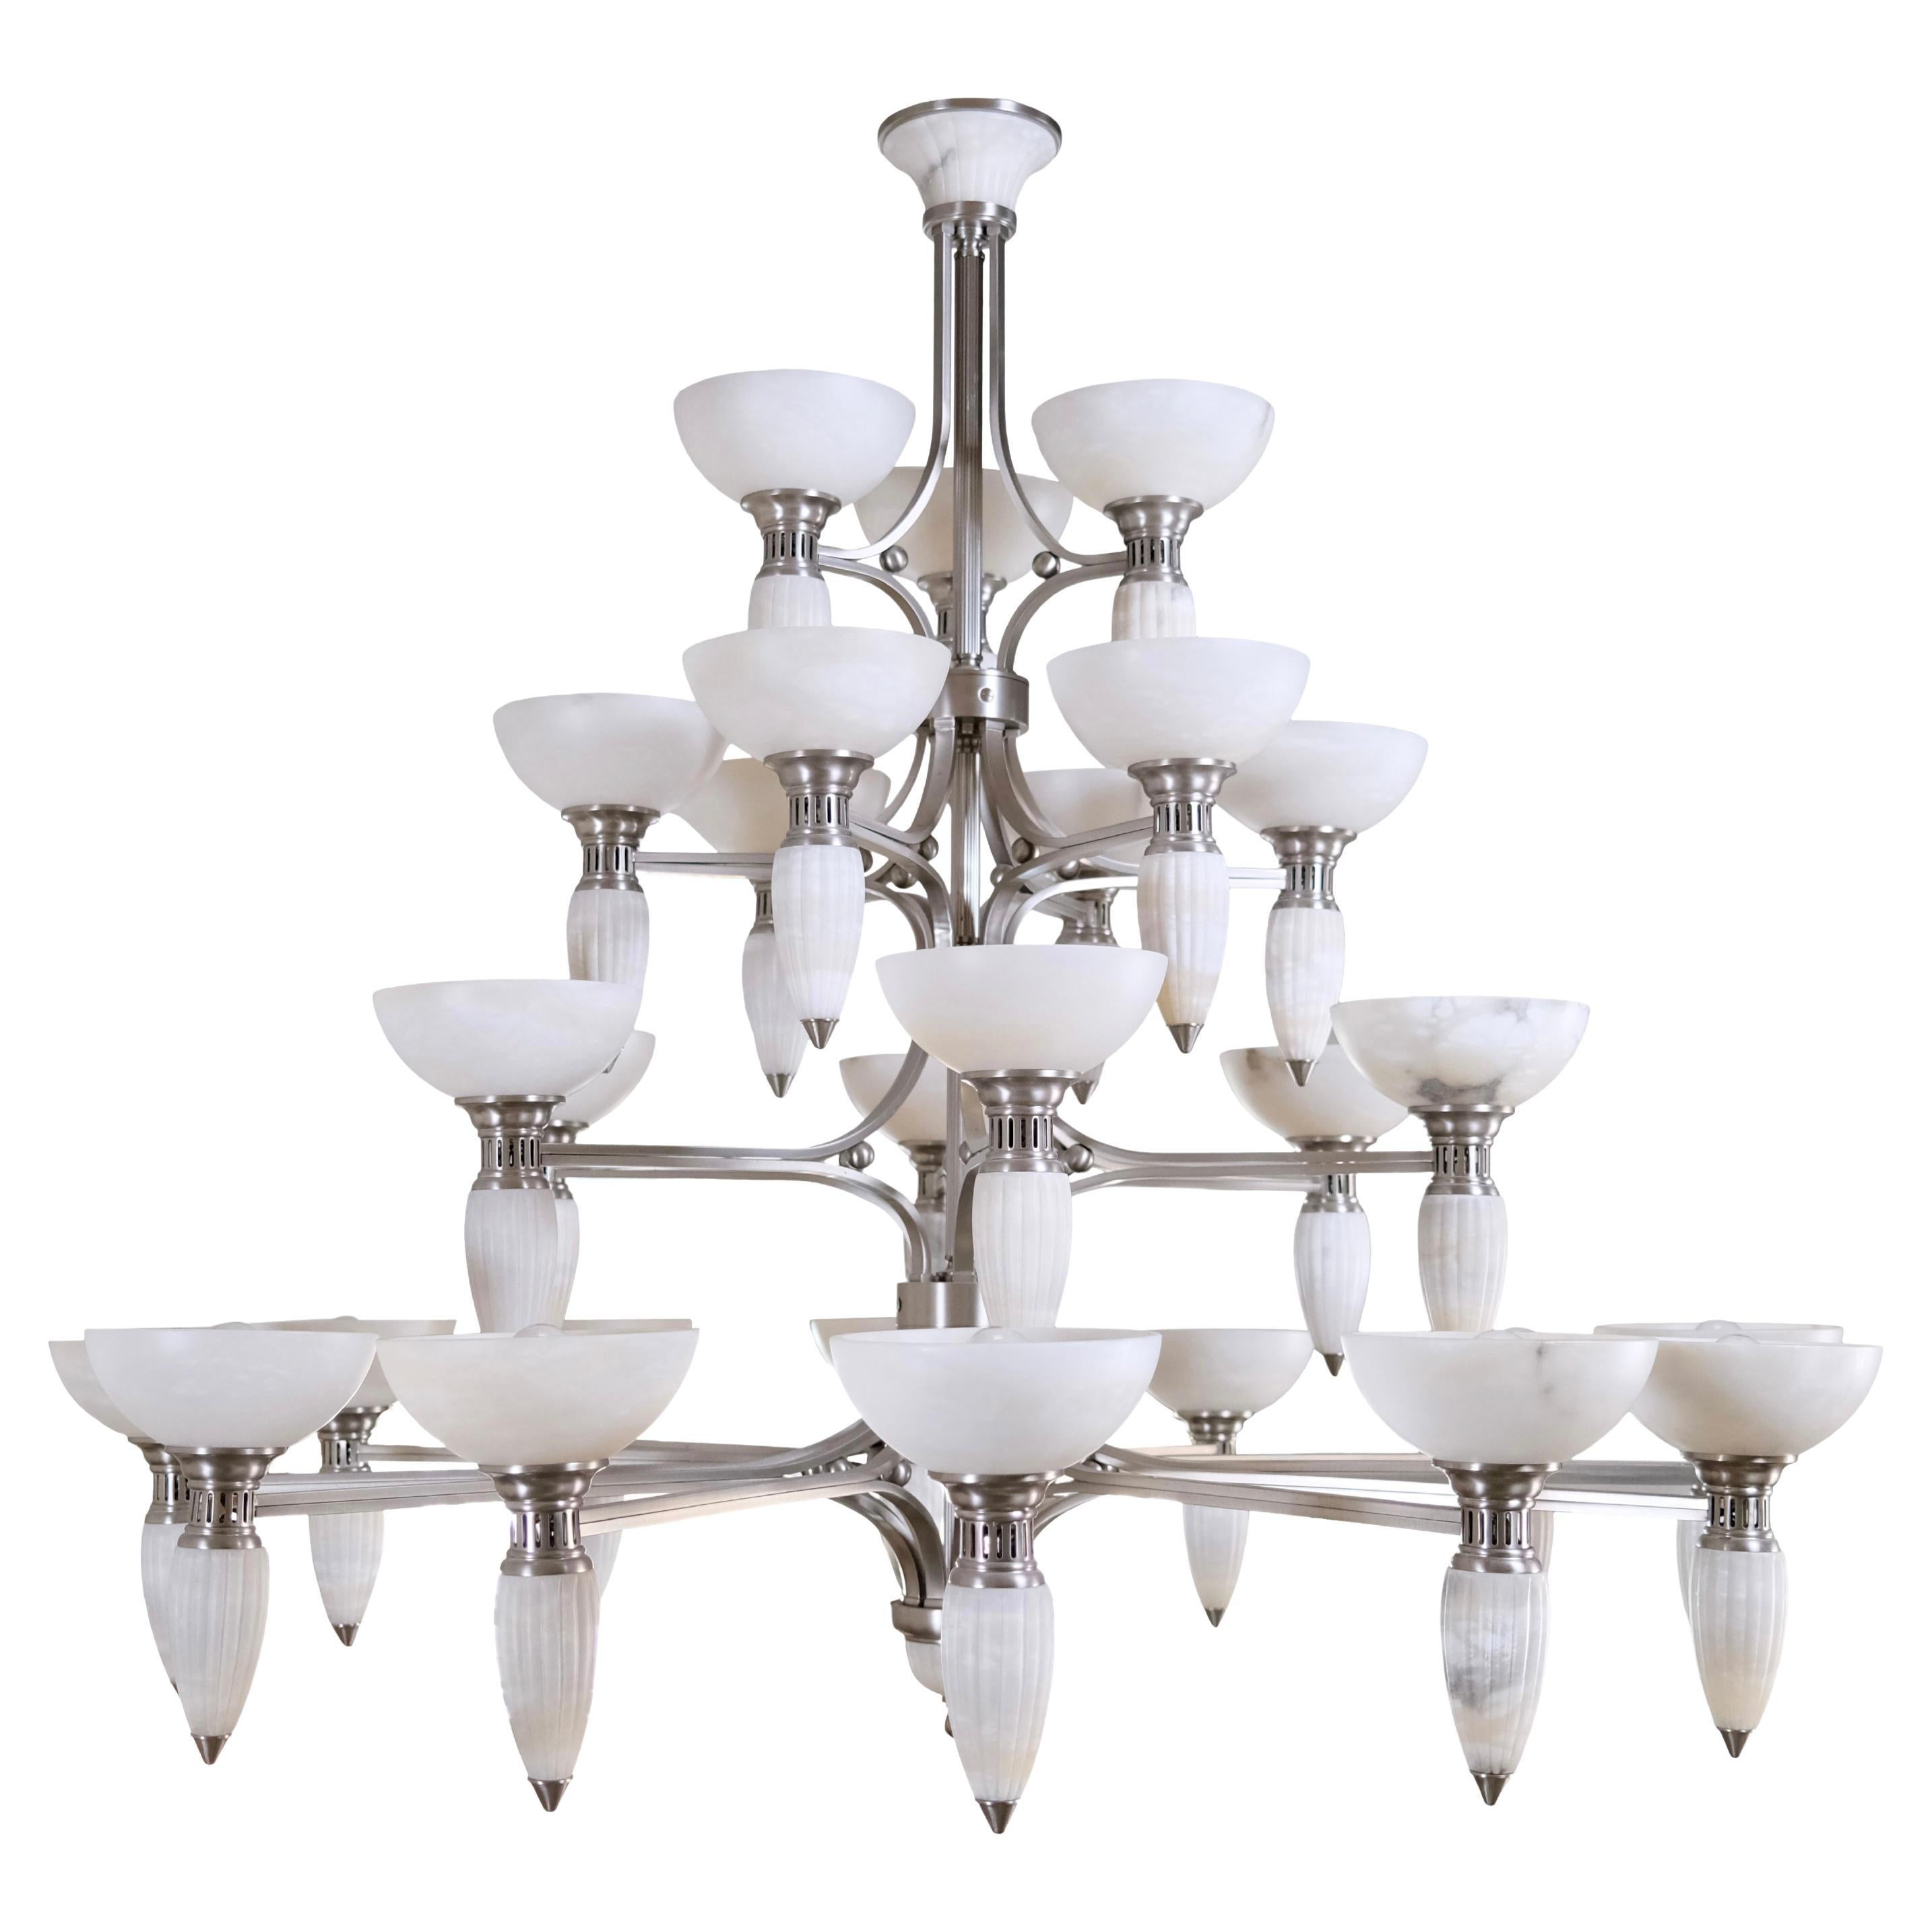 Impressive Art Deco Style Chandelier with Alabaster Bowls and Illuminated Cones